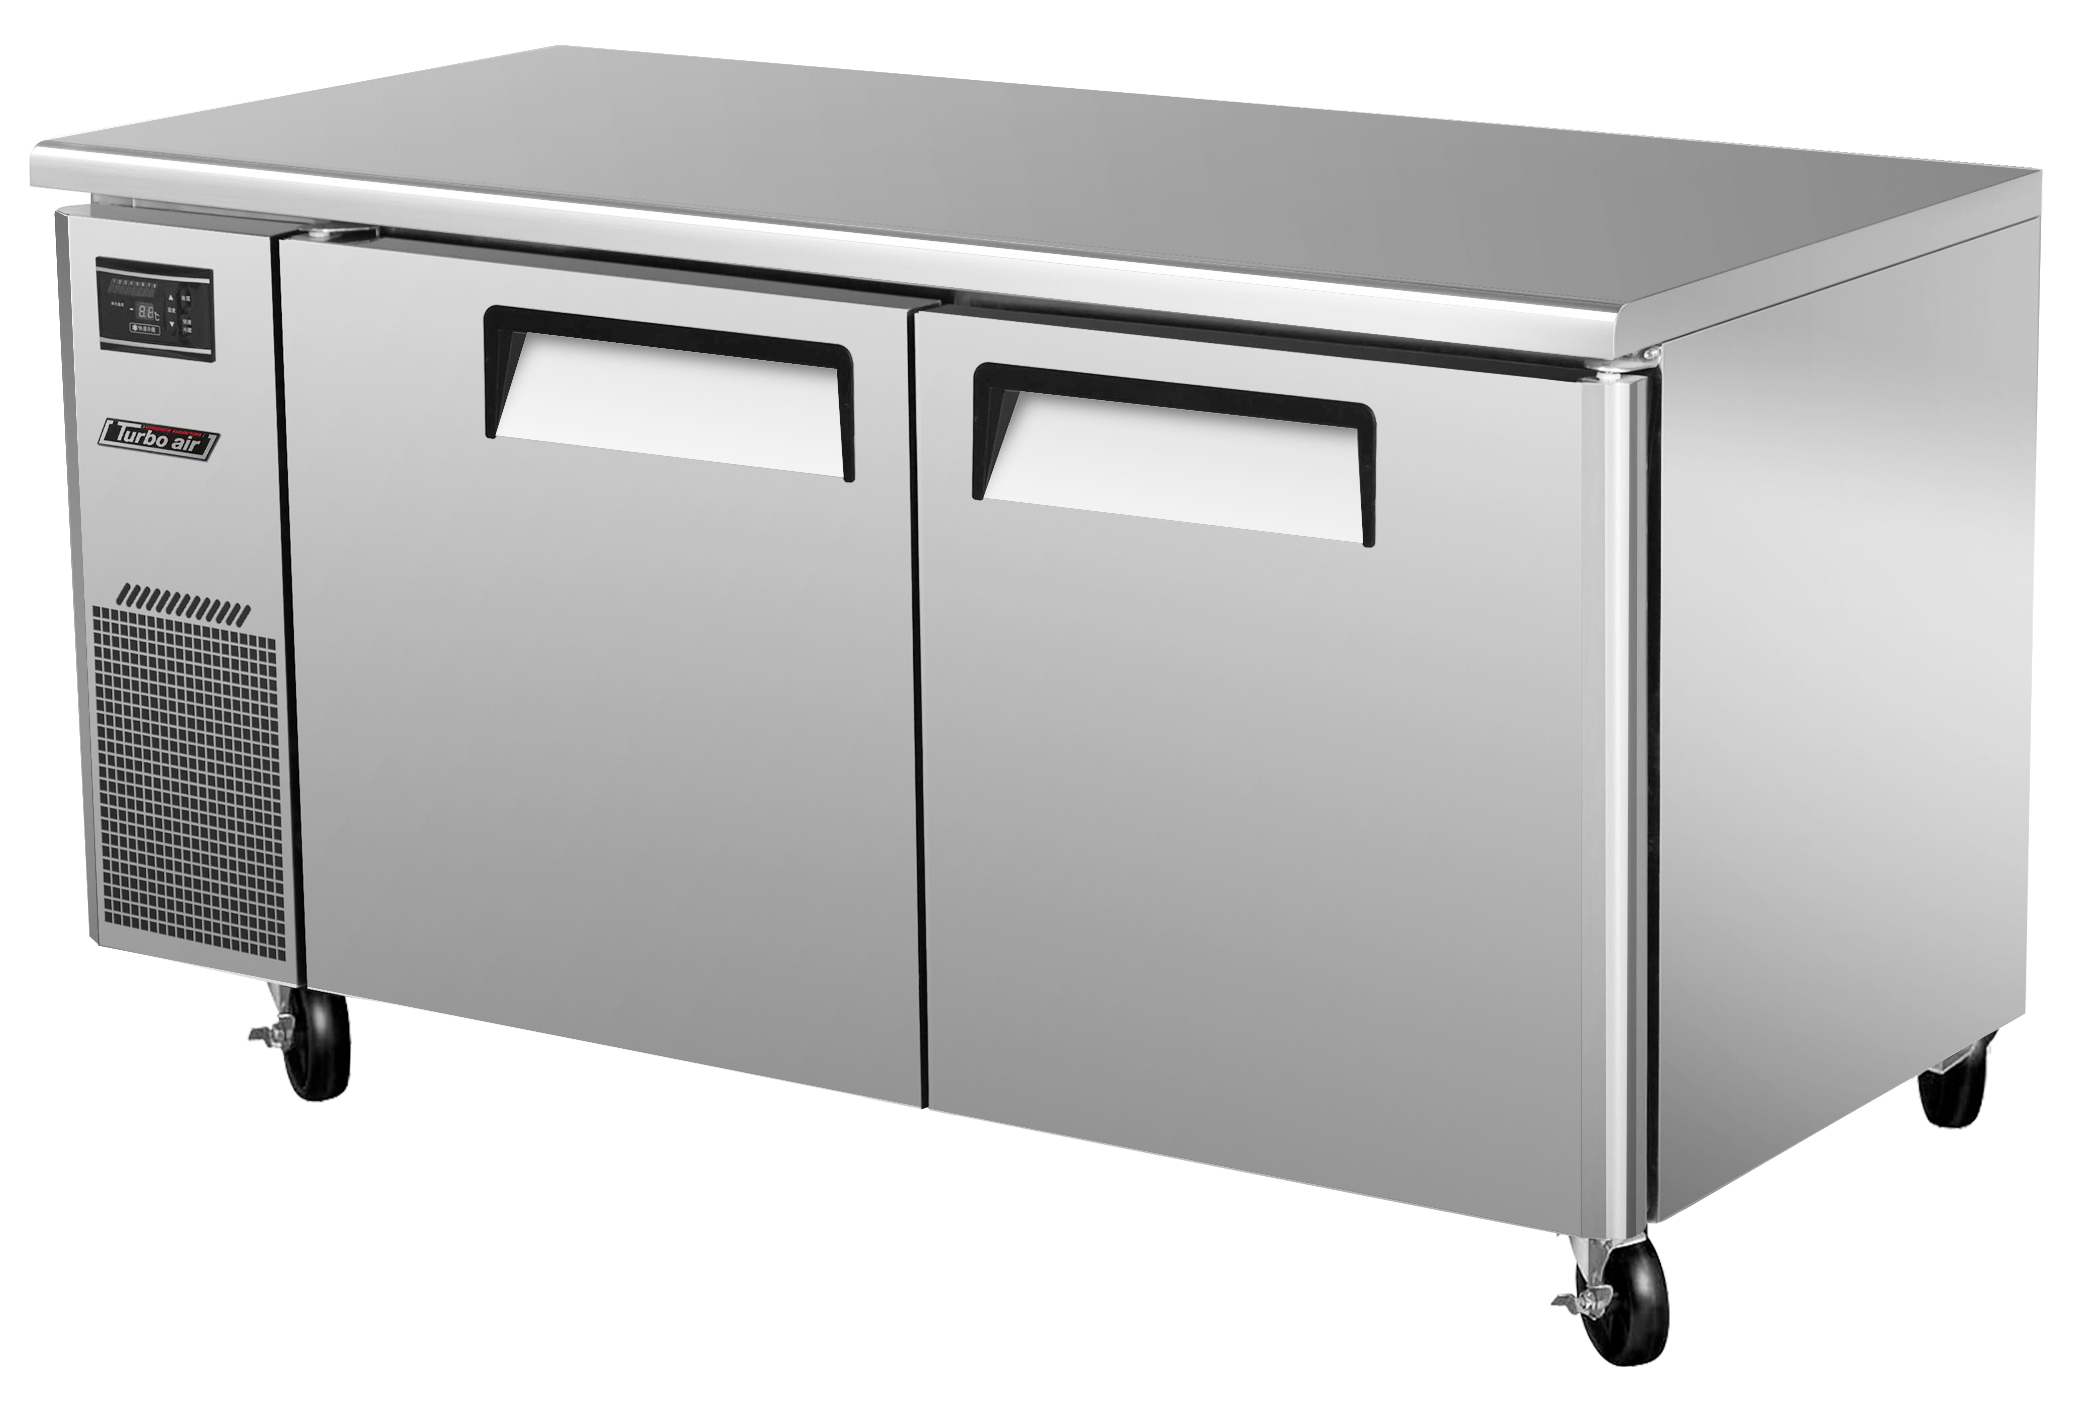 J Series Narrow Side Mount Undercounter Refrigerator - Click Image to Close